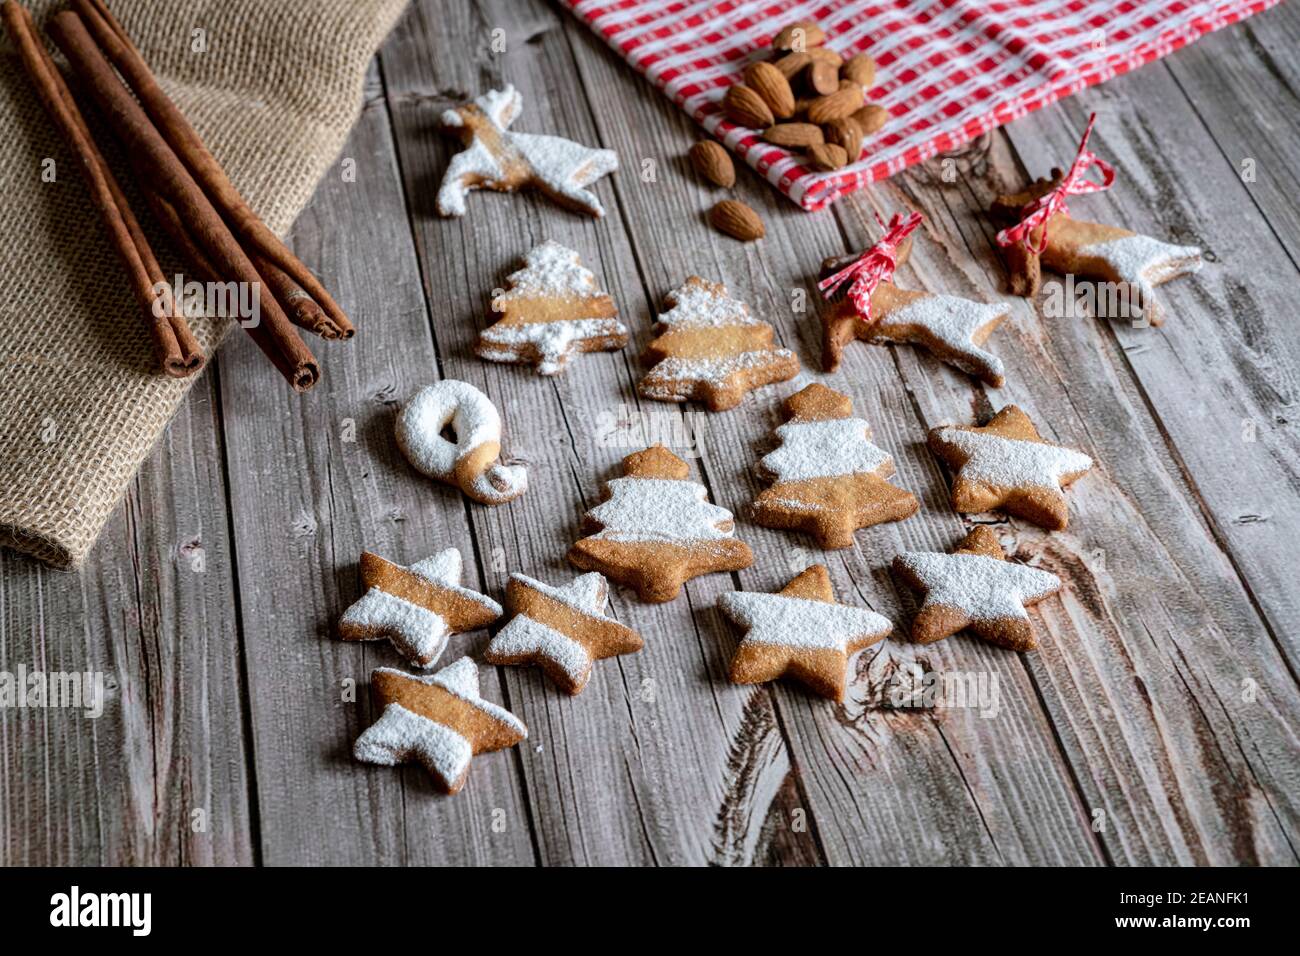 Gingerbread and butter cookies in shape of Christmas tree and stars with almond and cinnamon on wood table background, Italy, Europe Stock Photo